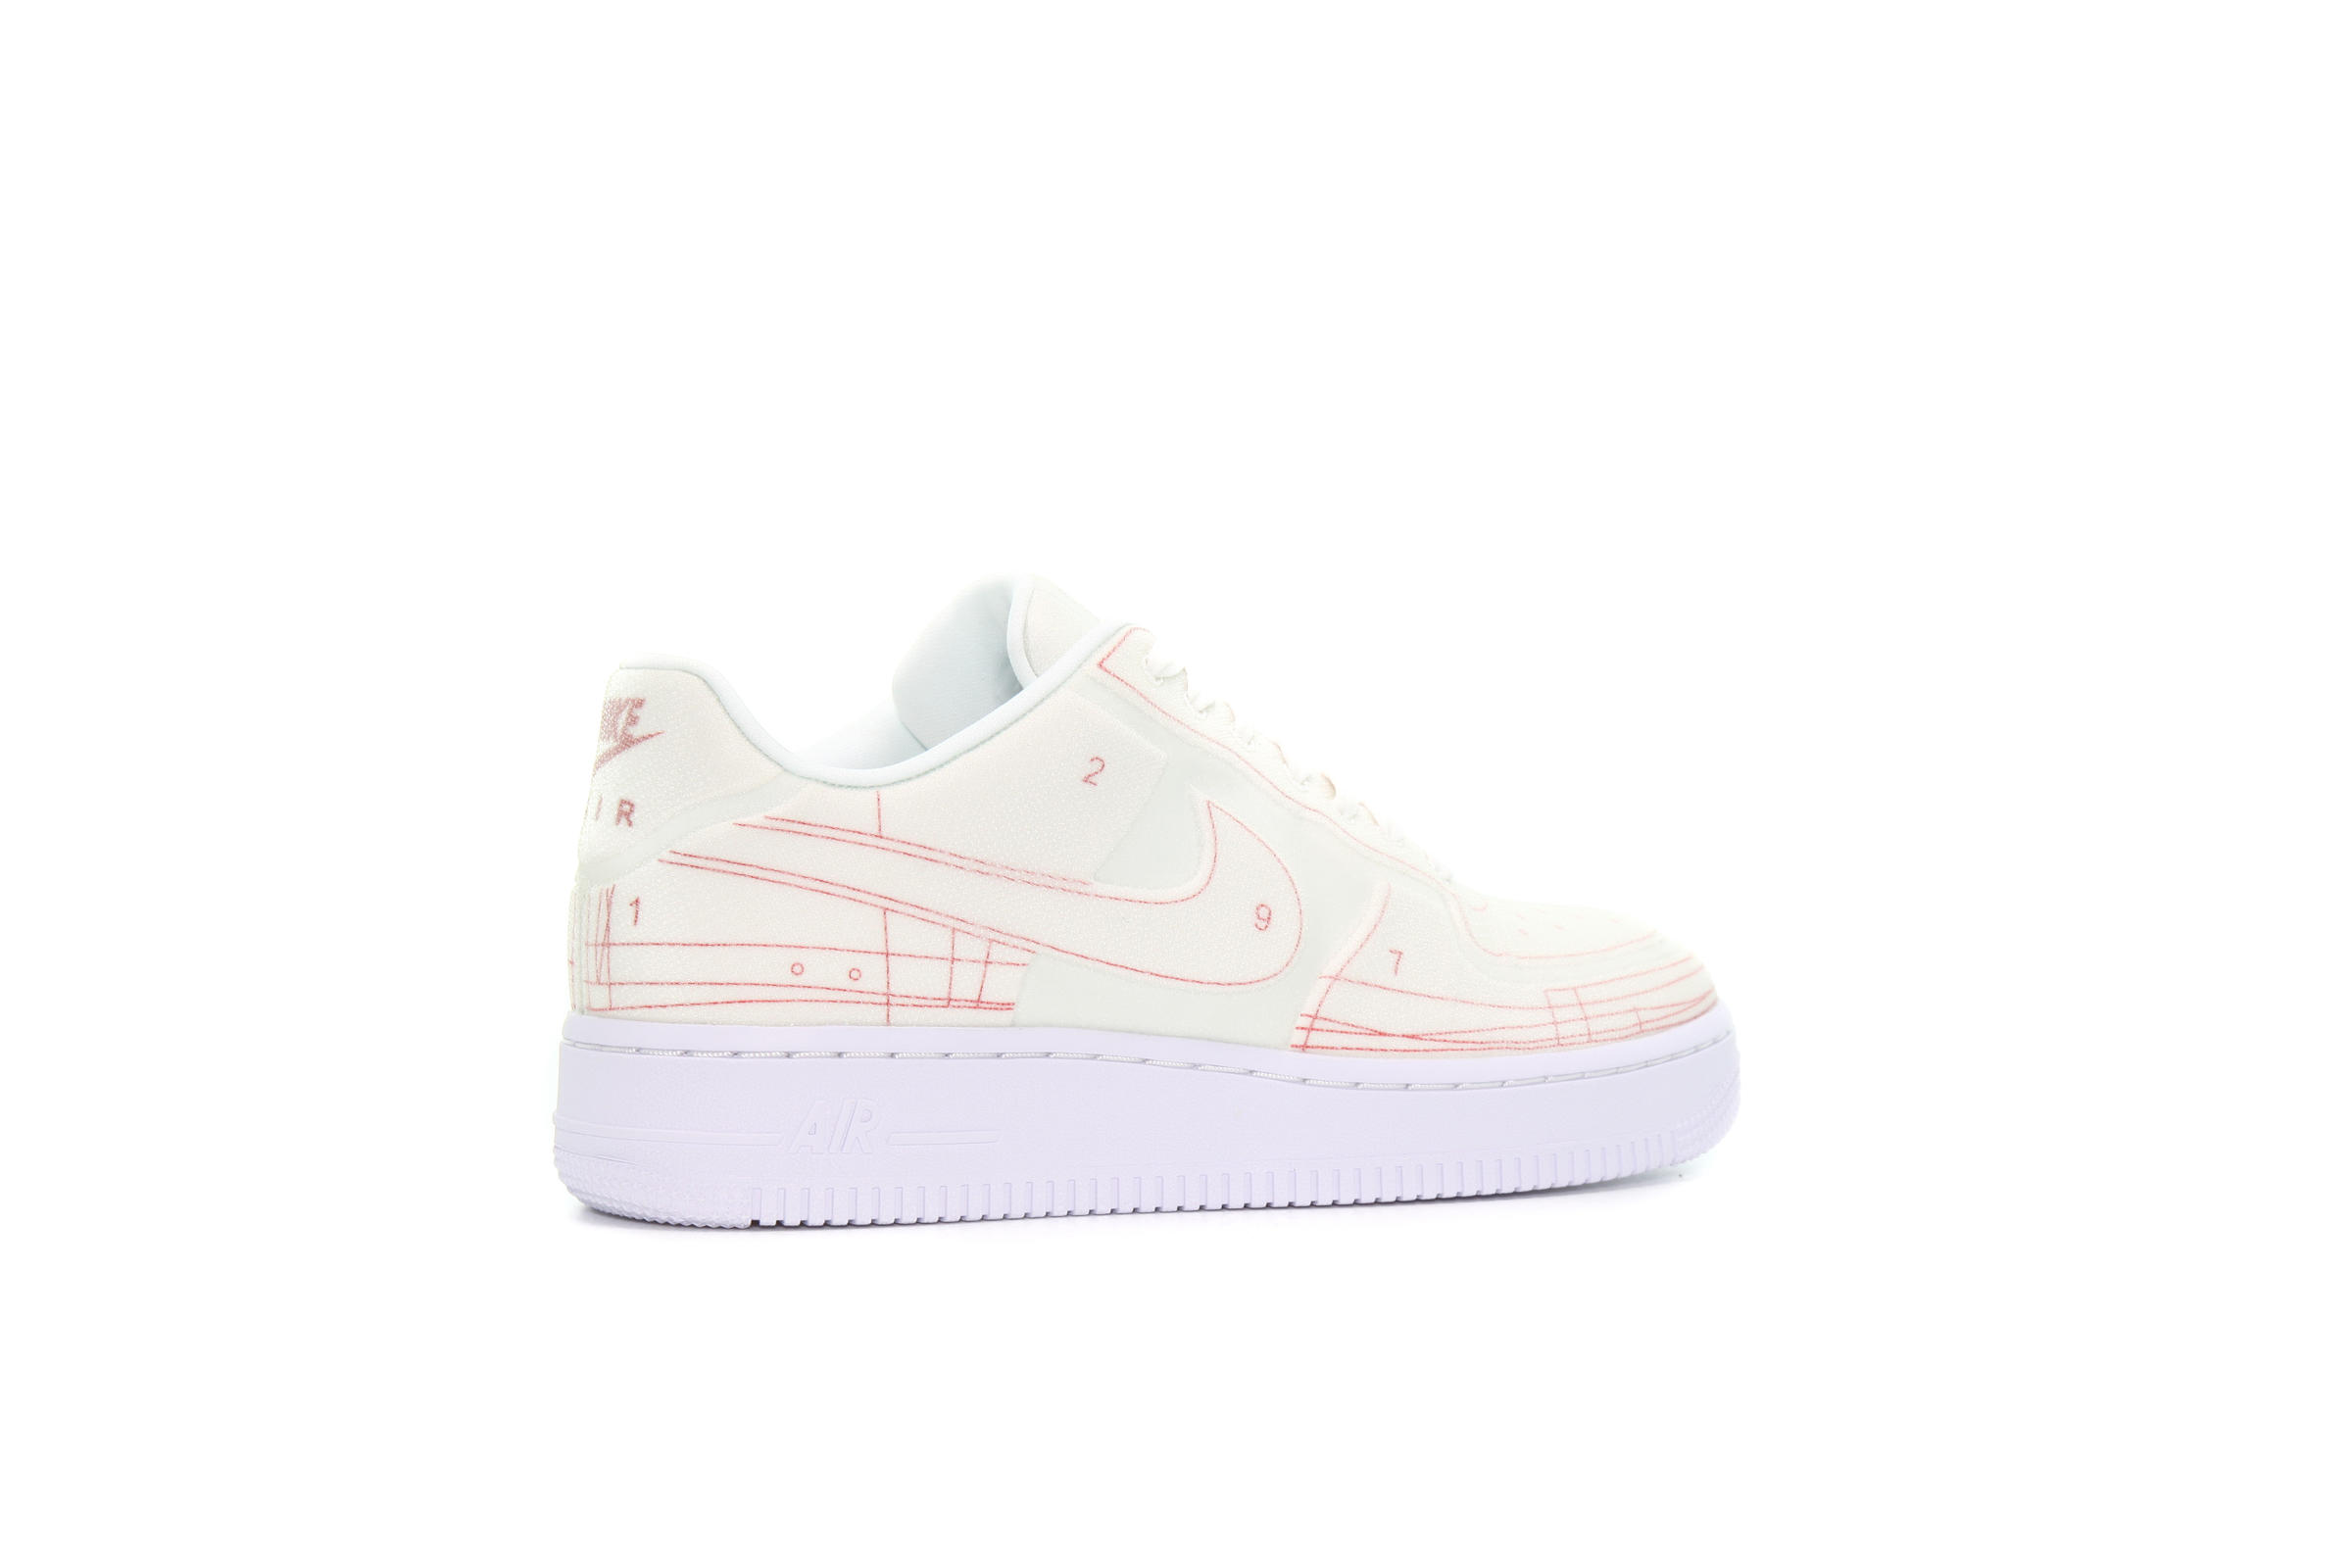 Nike WMNS AIR FORCE 1 '07 LX "SCHEMATIC WHITE"